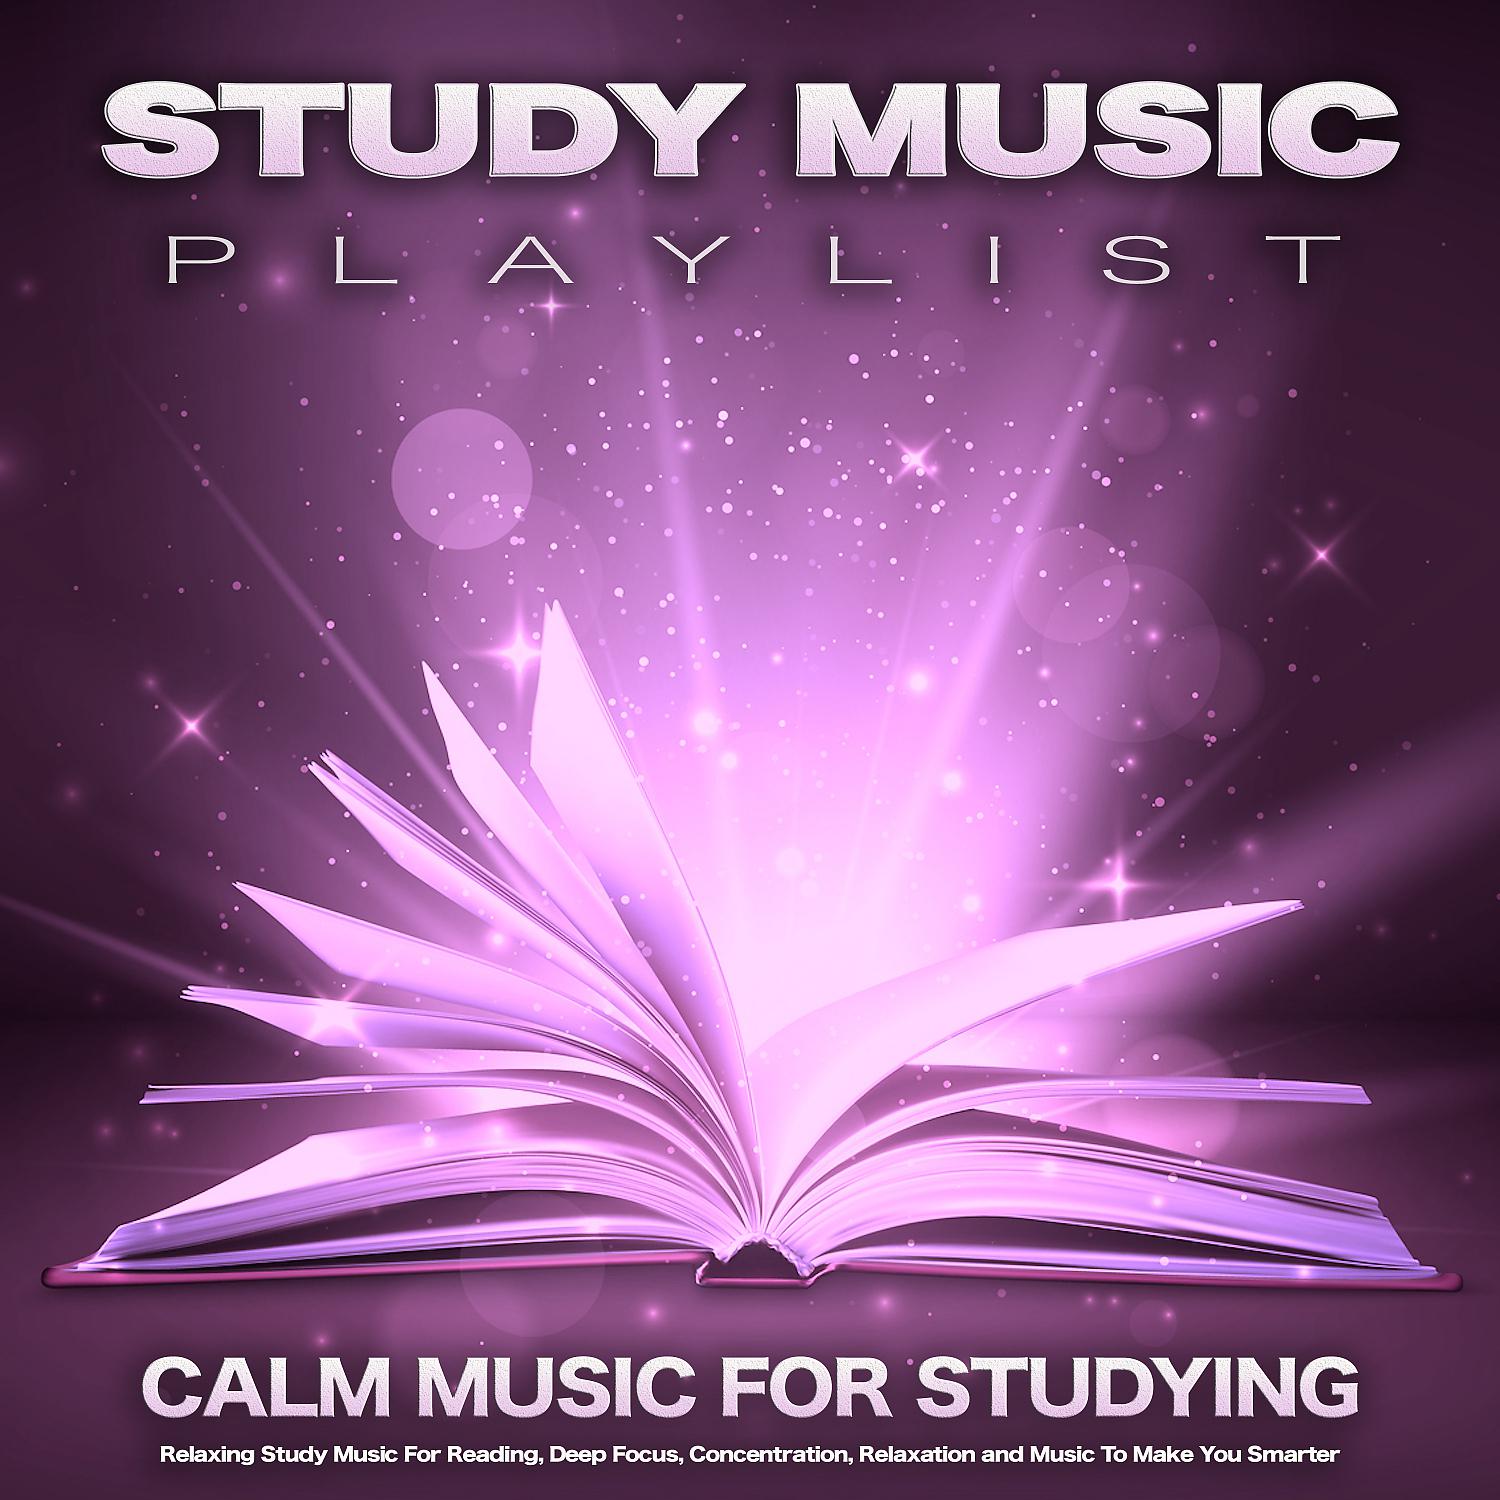 Постер альбома Study  Music Playlist: Calm Music For Studying, Relaxing Study Music For Reading, Deep Focus, Concentration, Relaxation and Music To Make You Smarter